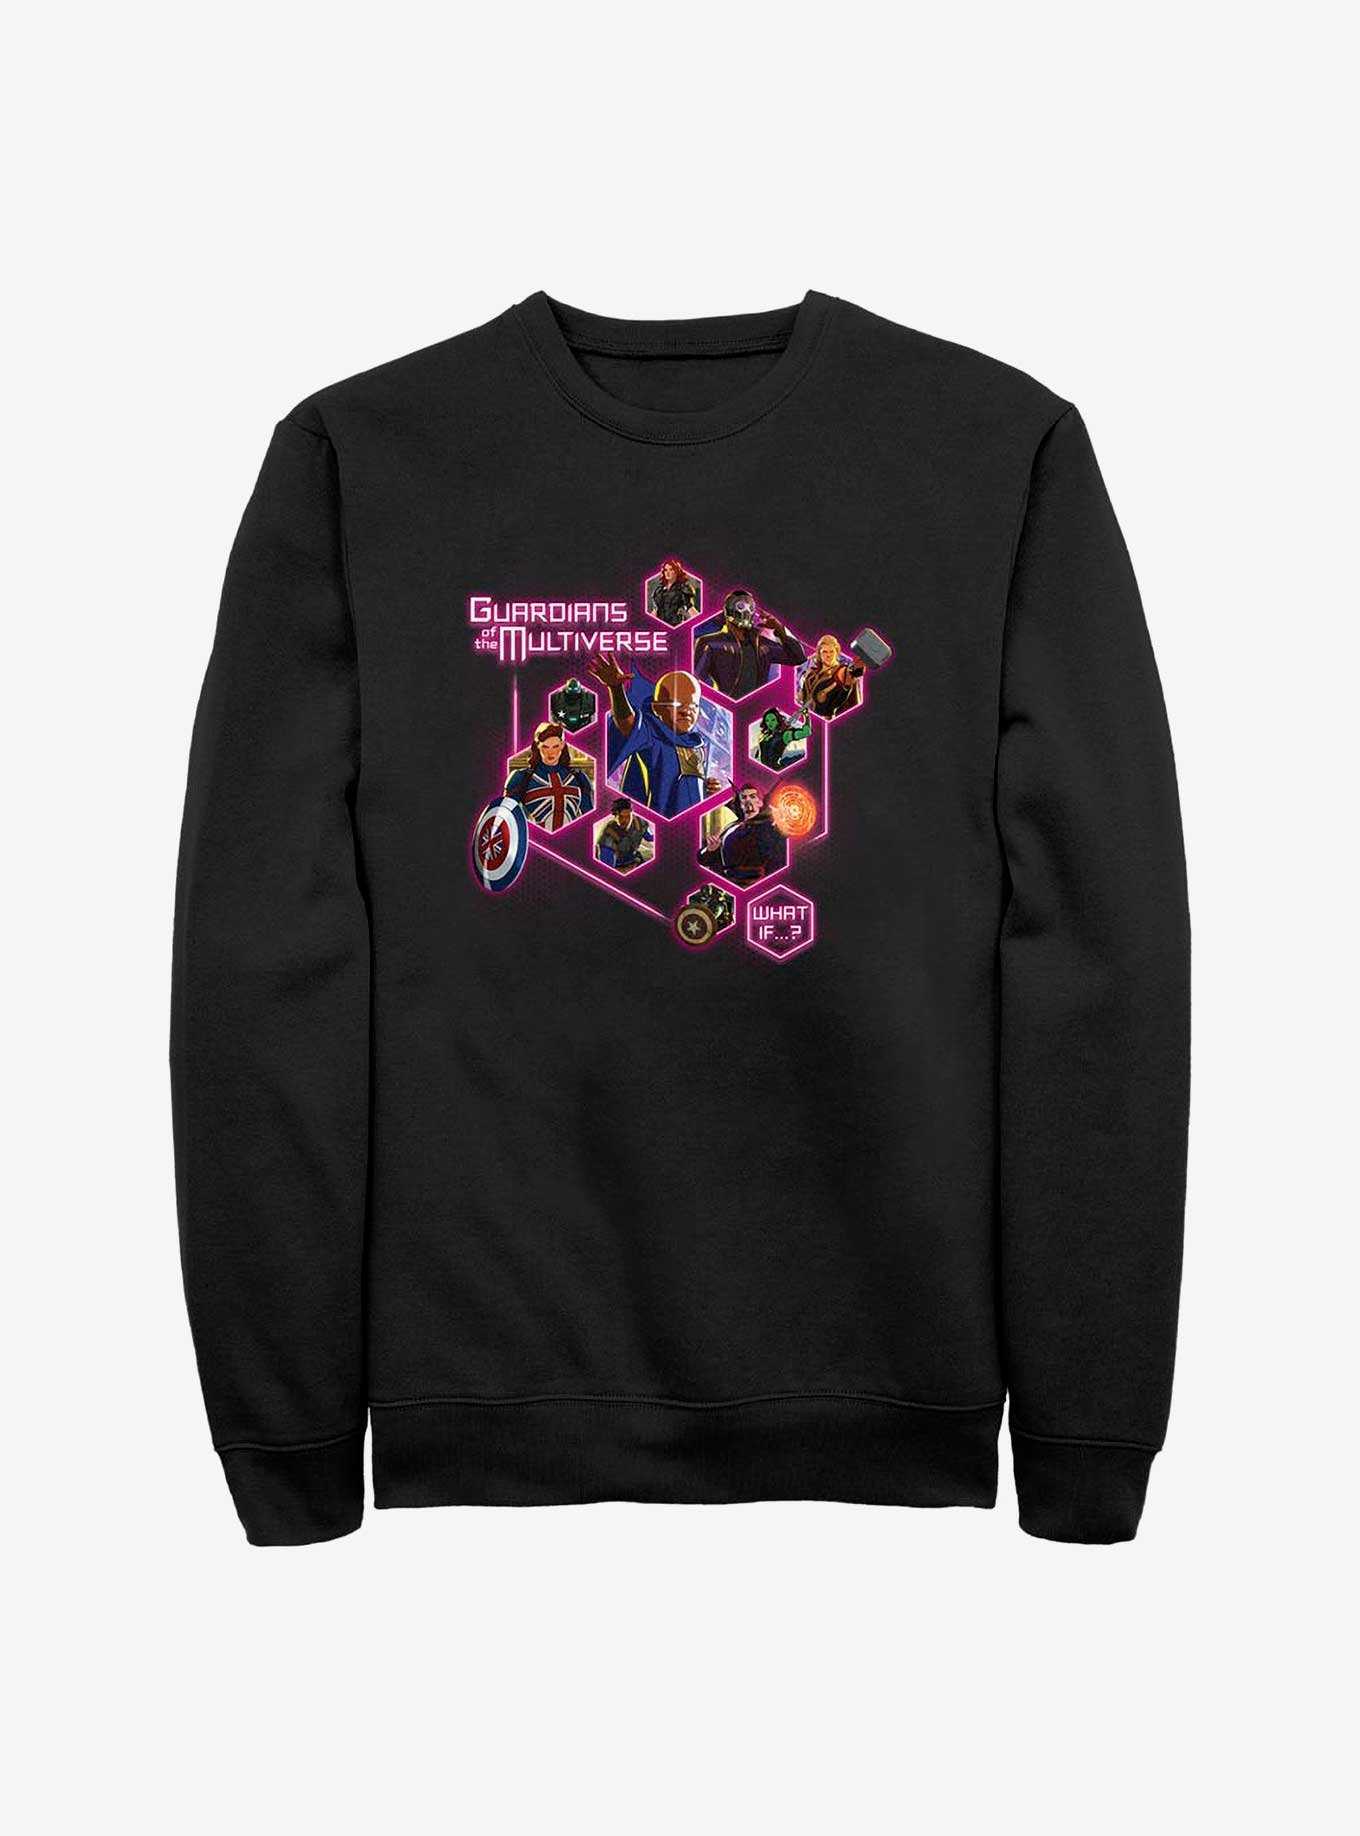 What If...? GuardiansOf The Multiverse Pods Sweatshirt, , hi-res